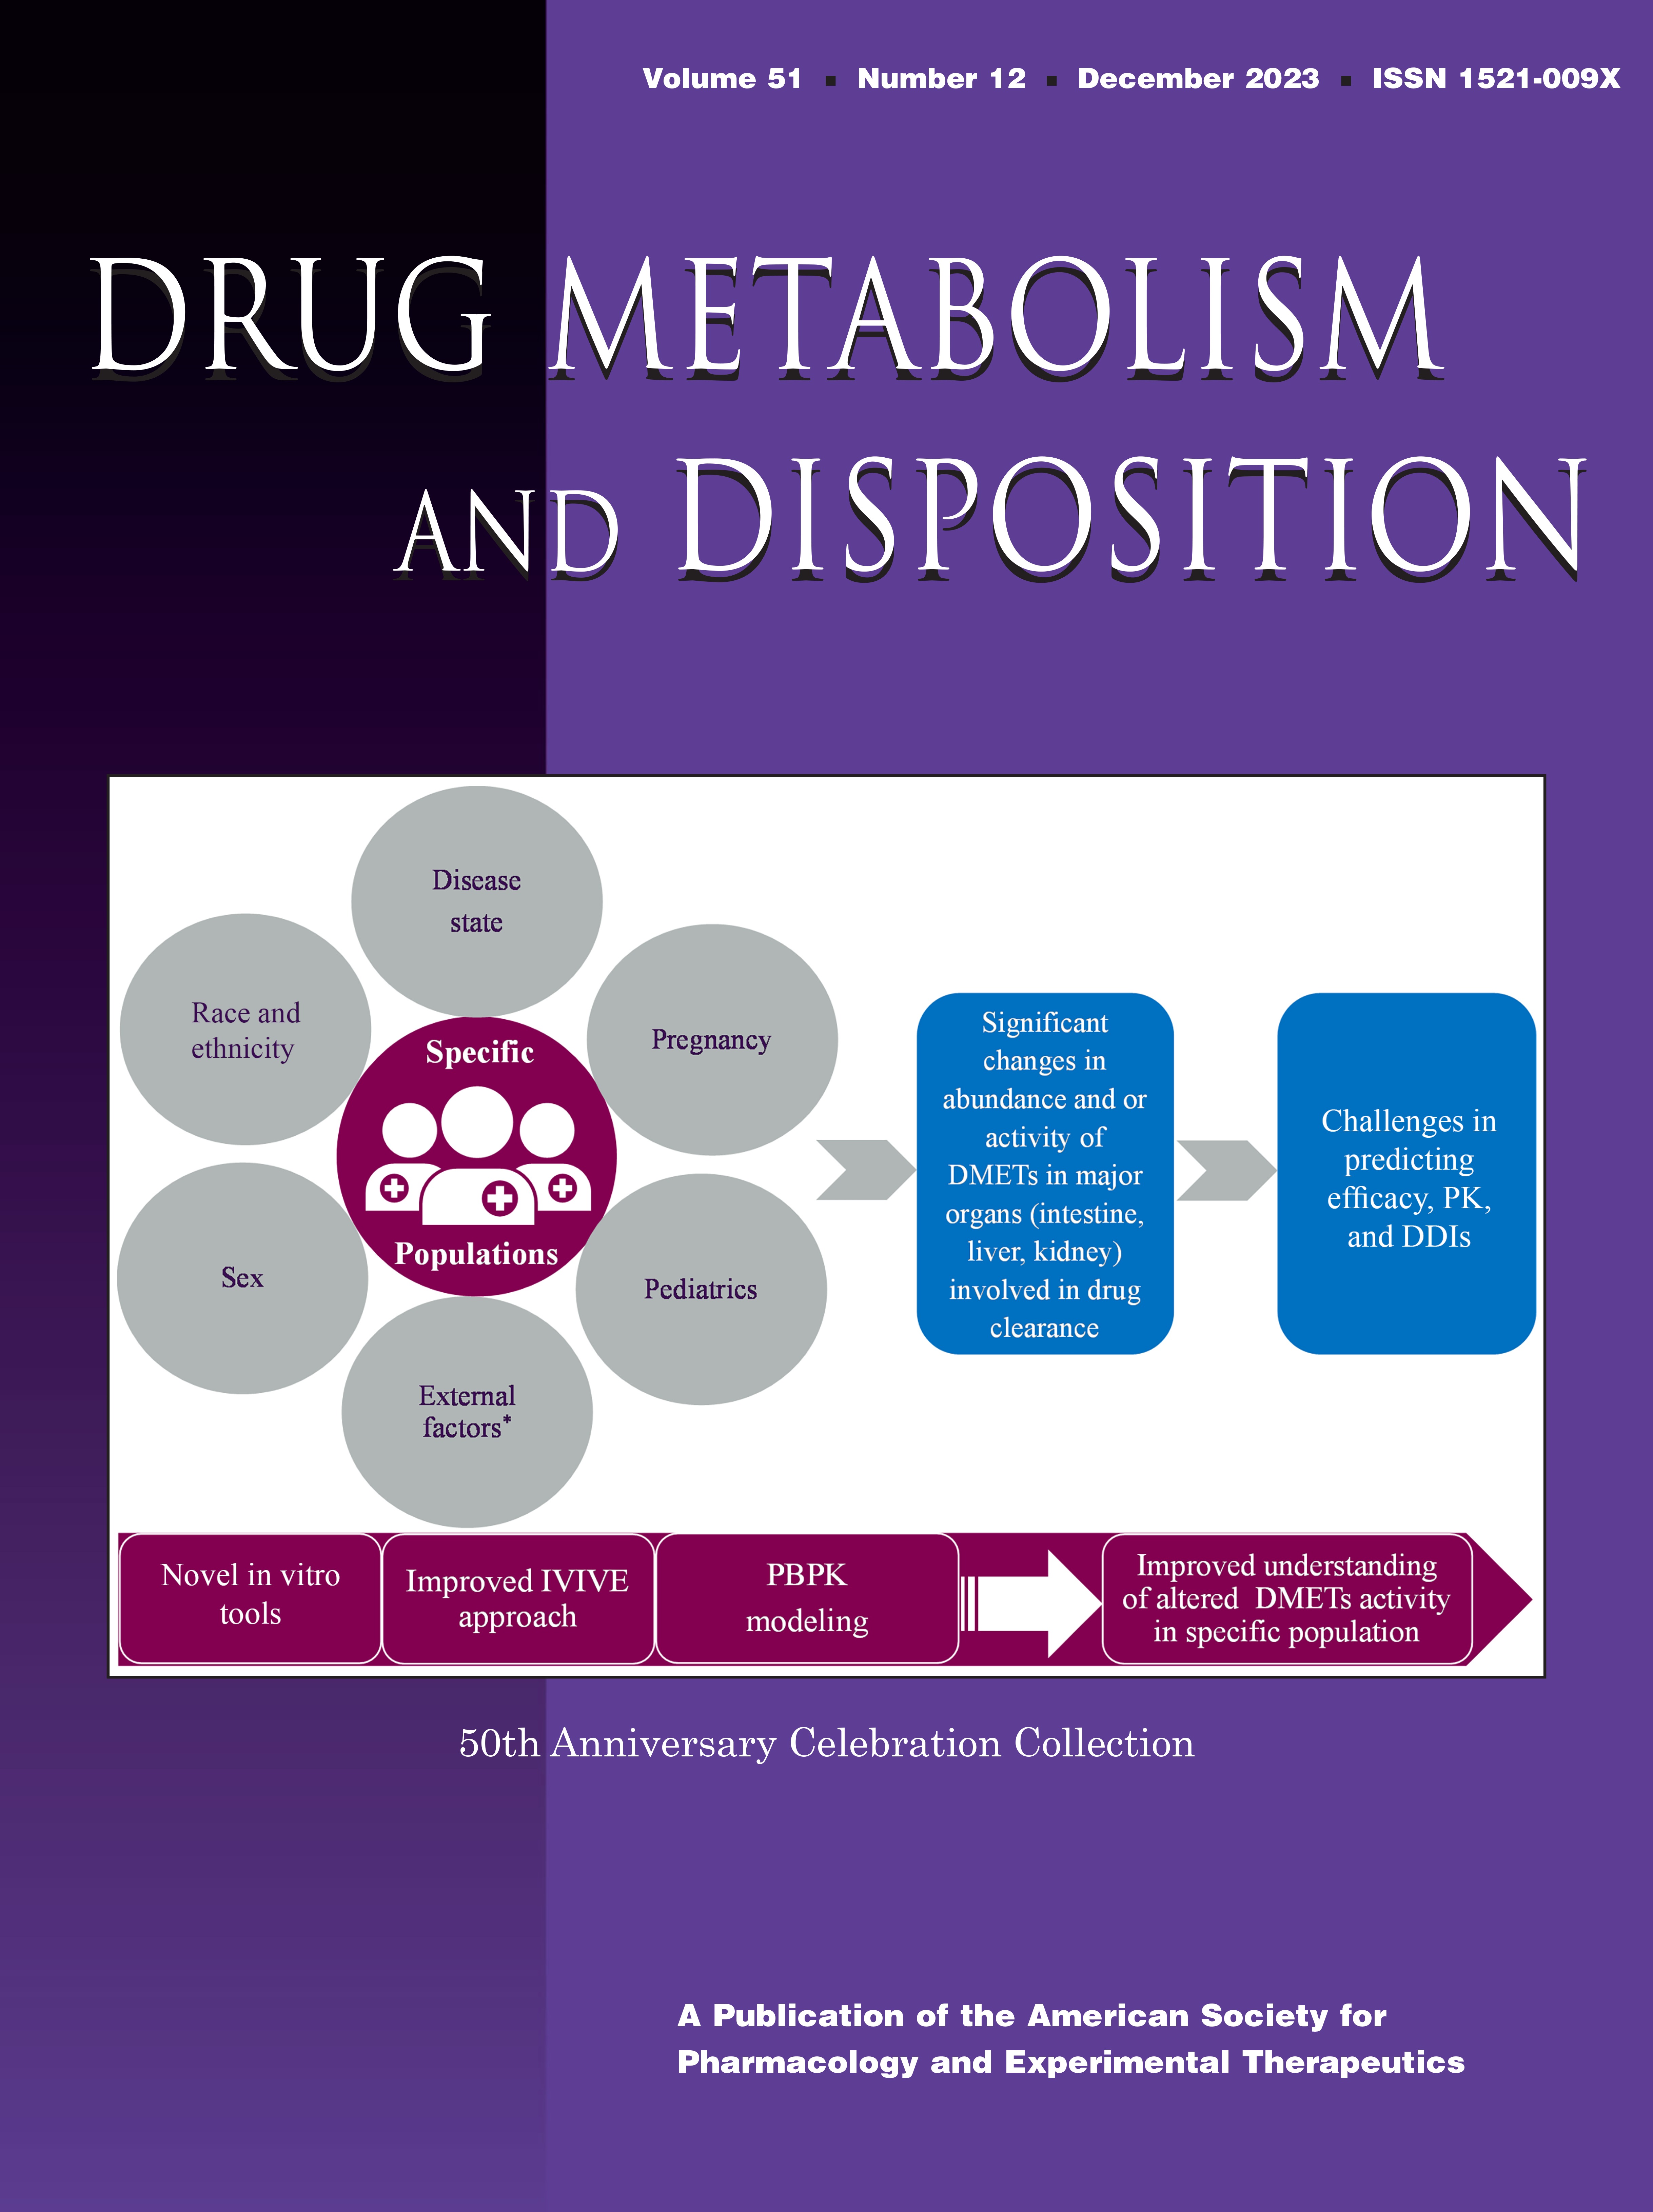 Innovations, Opportunities, and Challenges for Predicting Alteration in Drug-Metabolizing Enzyme and Transporter Activity in Specific Populations [50th Anniversary Celebration Collection-Commentary]